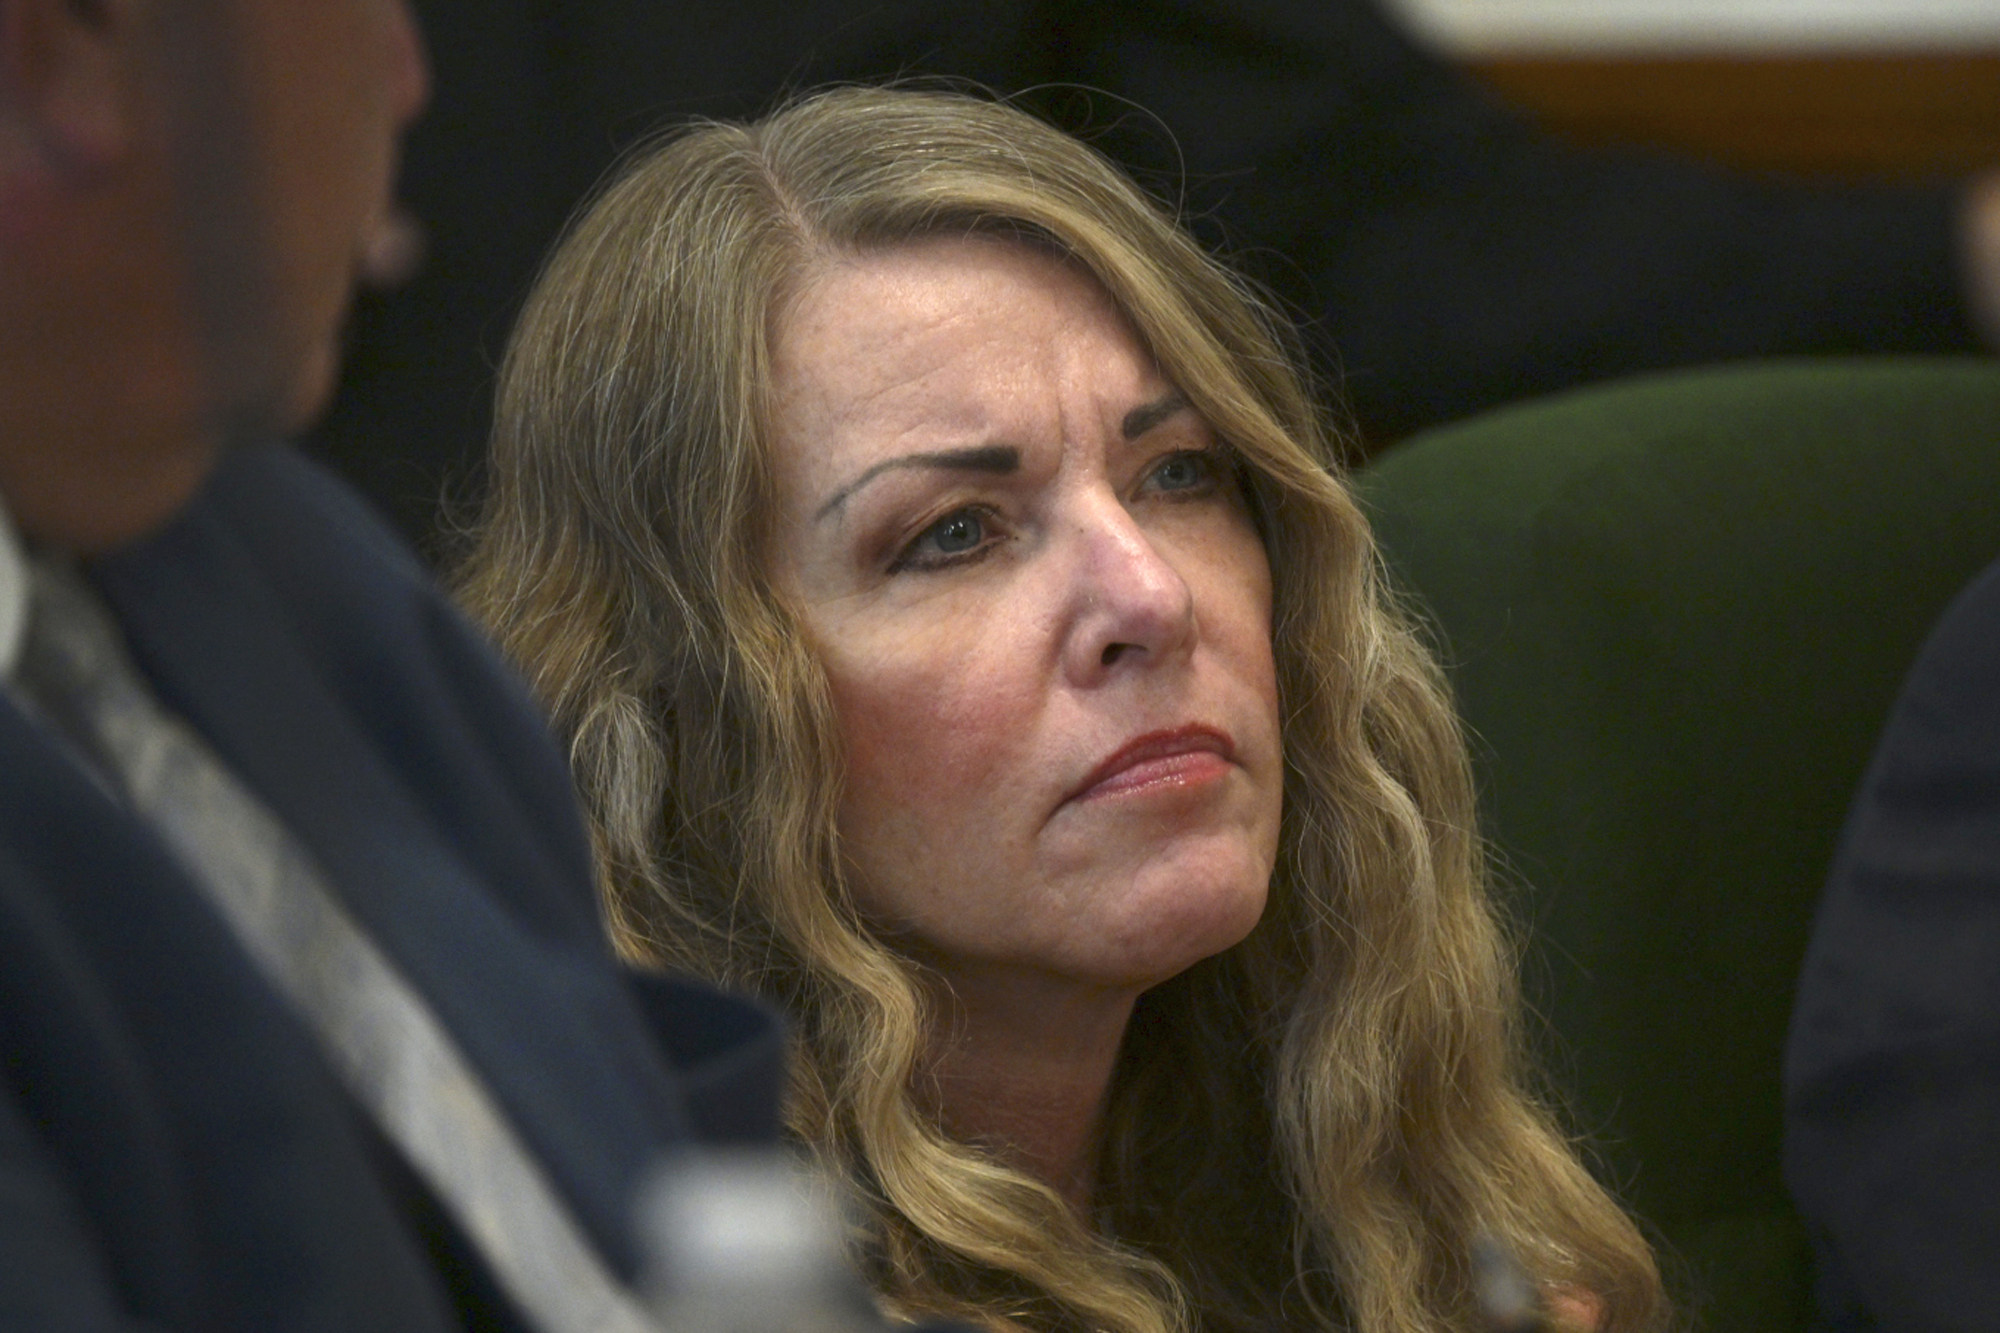 Lori Vallow Daybell sits during her sentencing hearing at the Fremont County Courthouse in St Anthony, Idaho, US on Monday. Photo: EastIdahoNews.com via AP